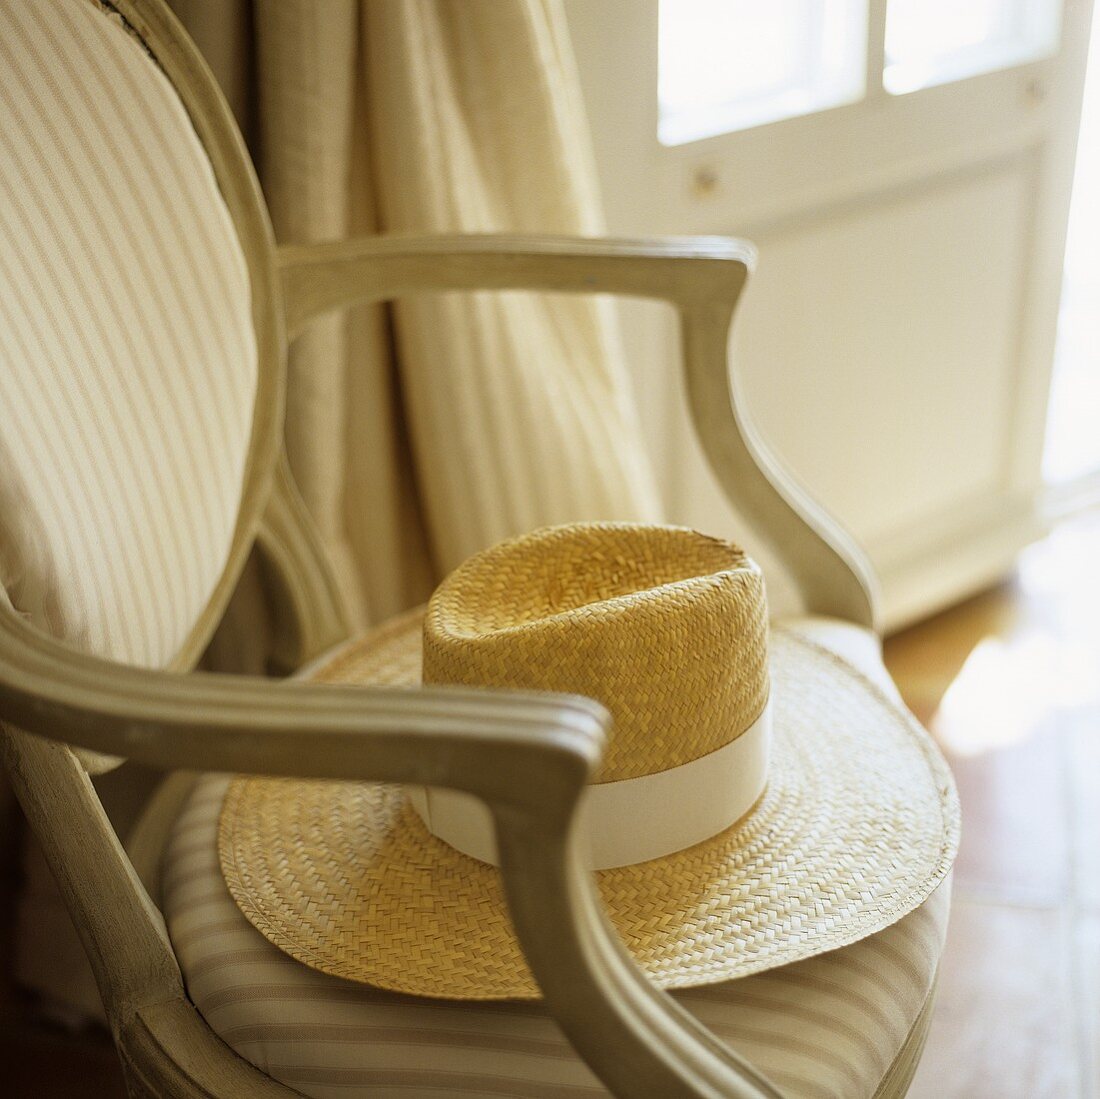 A straw hat with a white ribbon on an upholstered chair with a stripy cover